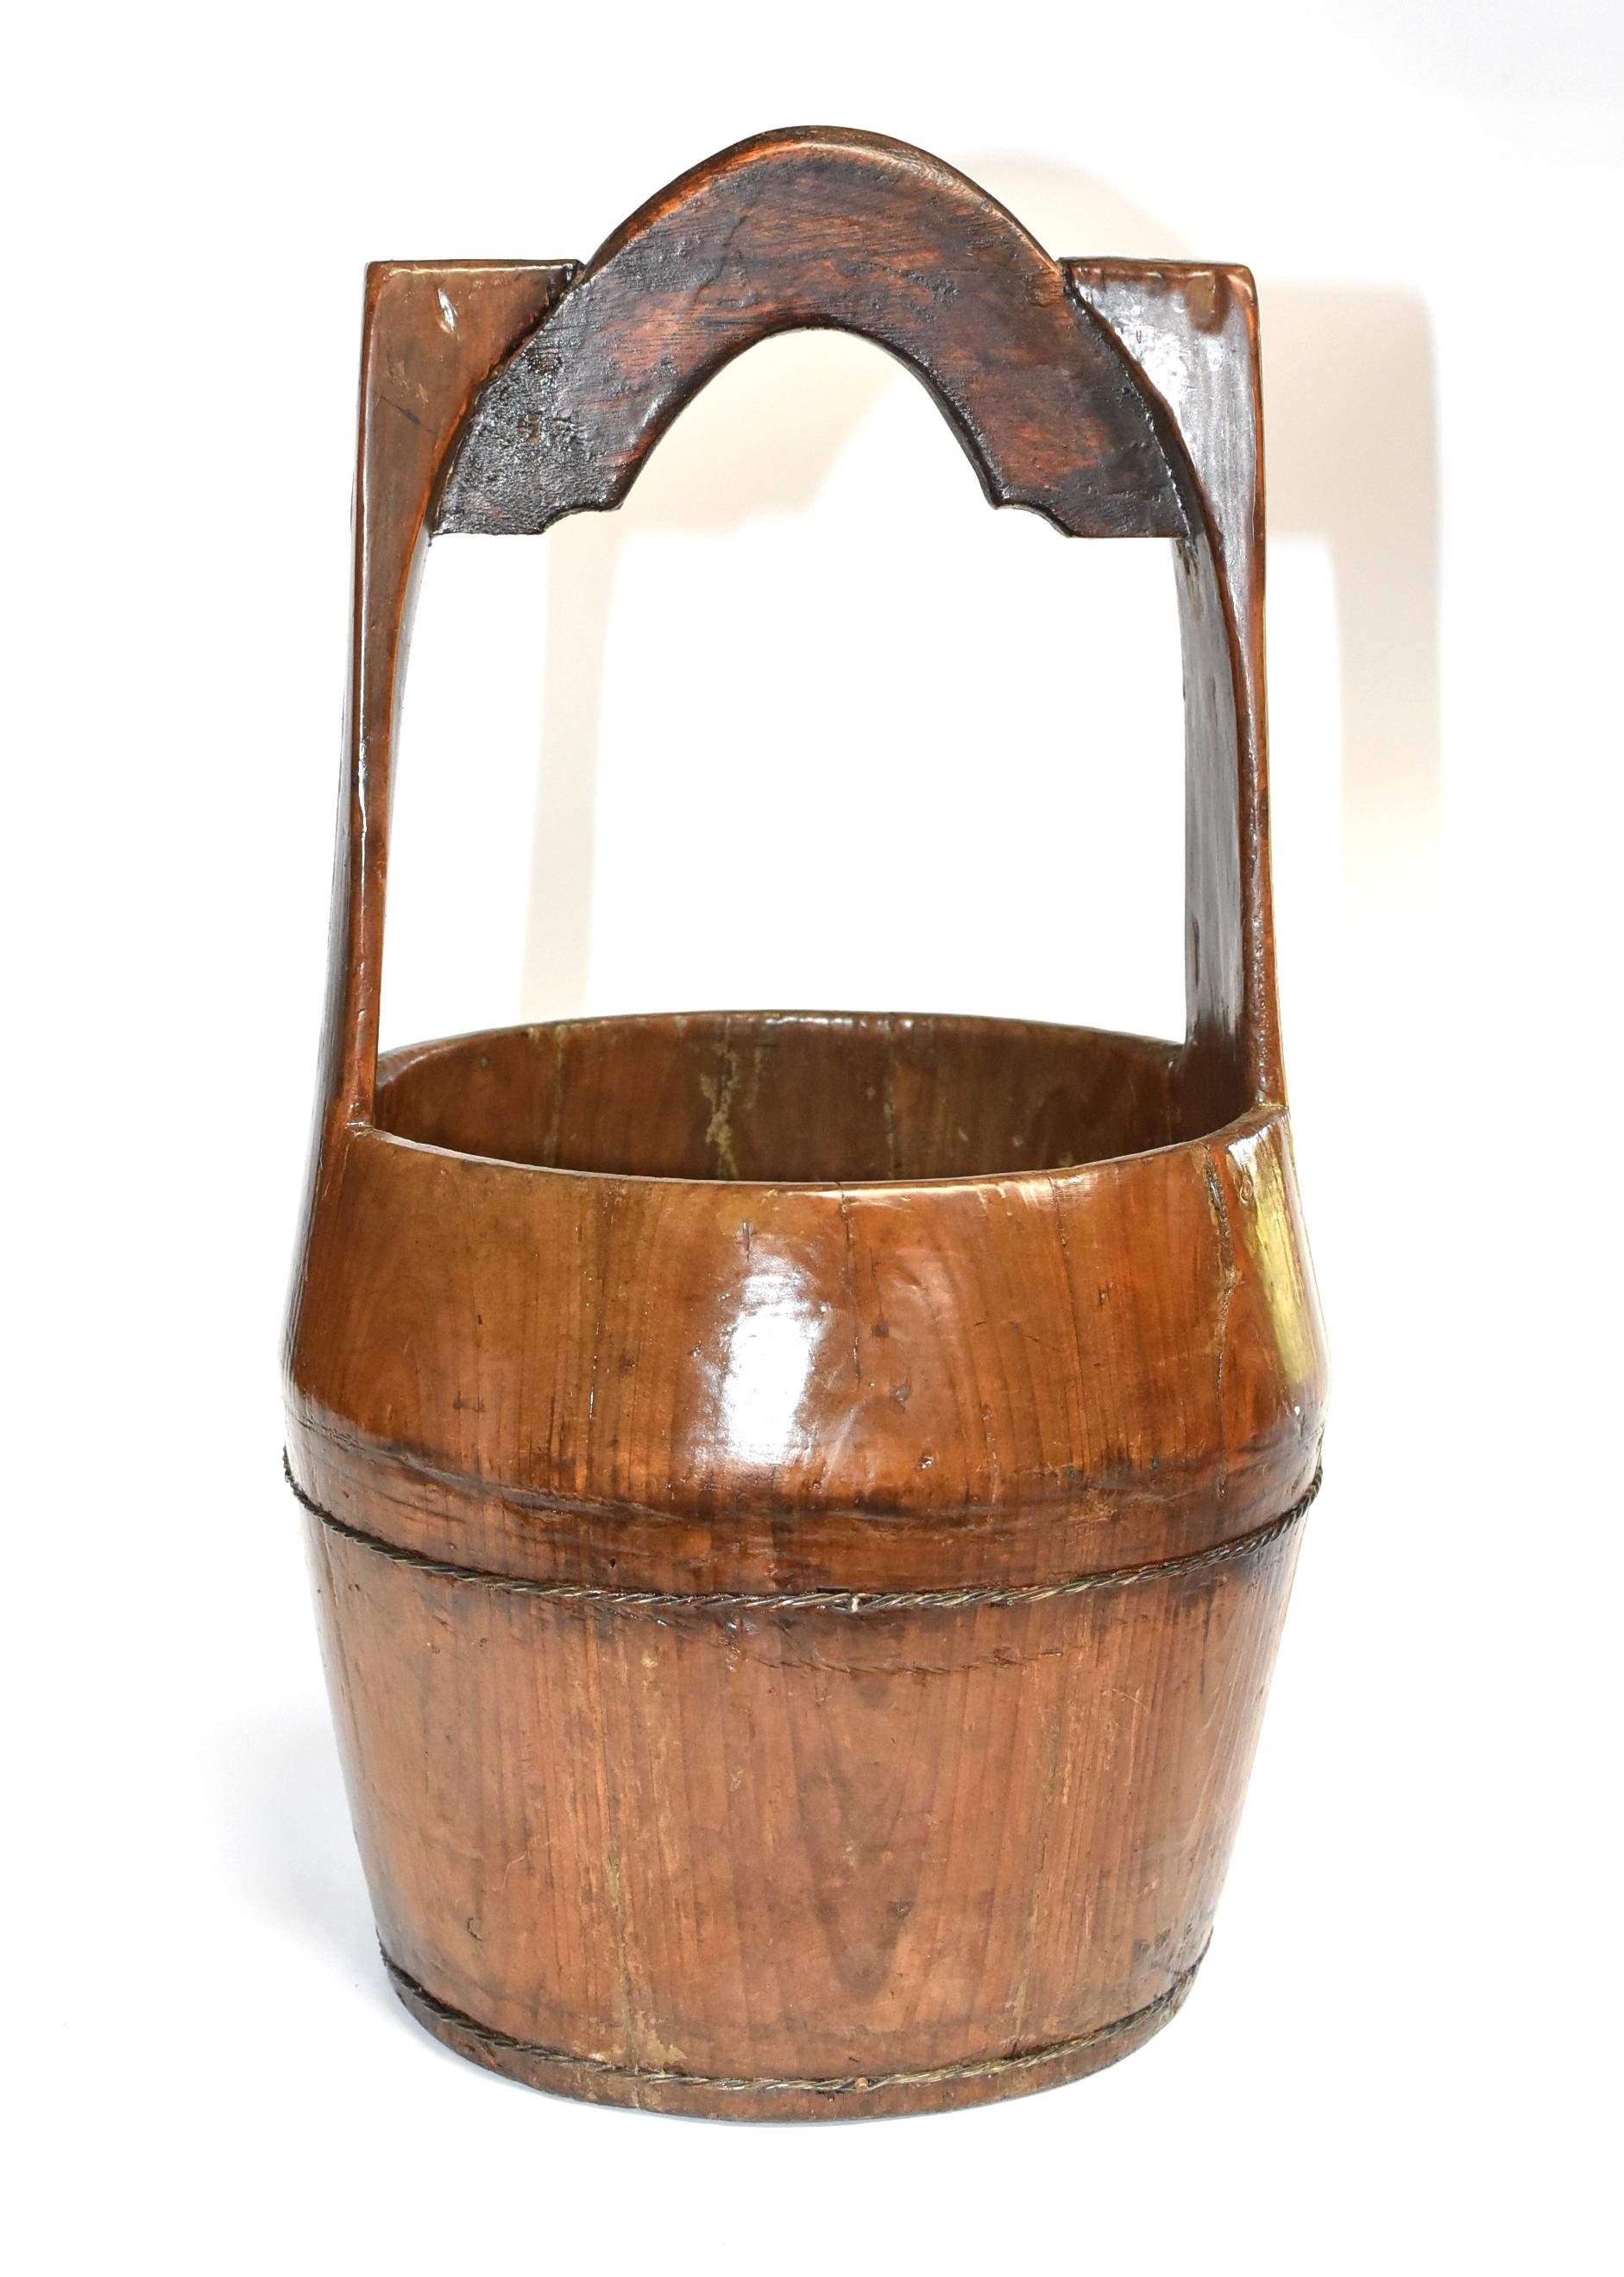 Beautiful Chinese antique basket. Such a basket was used to fetch water from the well. Its curved top allows secure fastening of rope on the handle. Solid wood construction. Metal wire tension enforcement. 19th century. All original. From southern